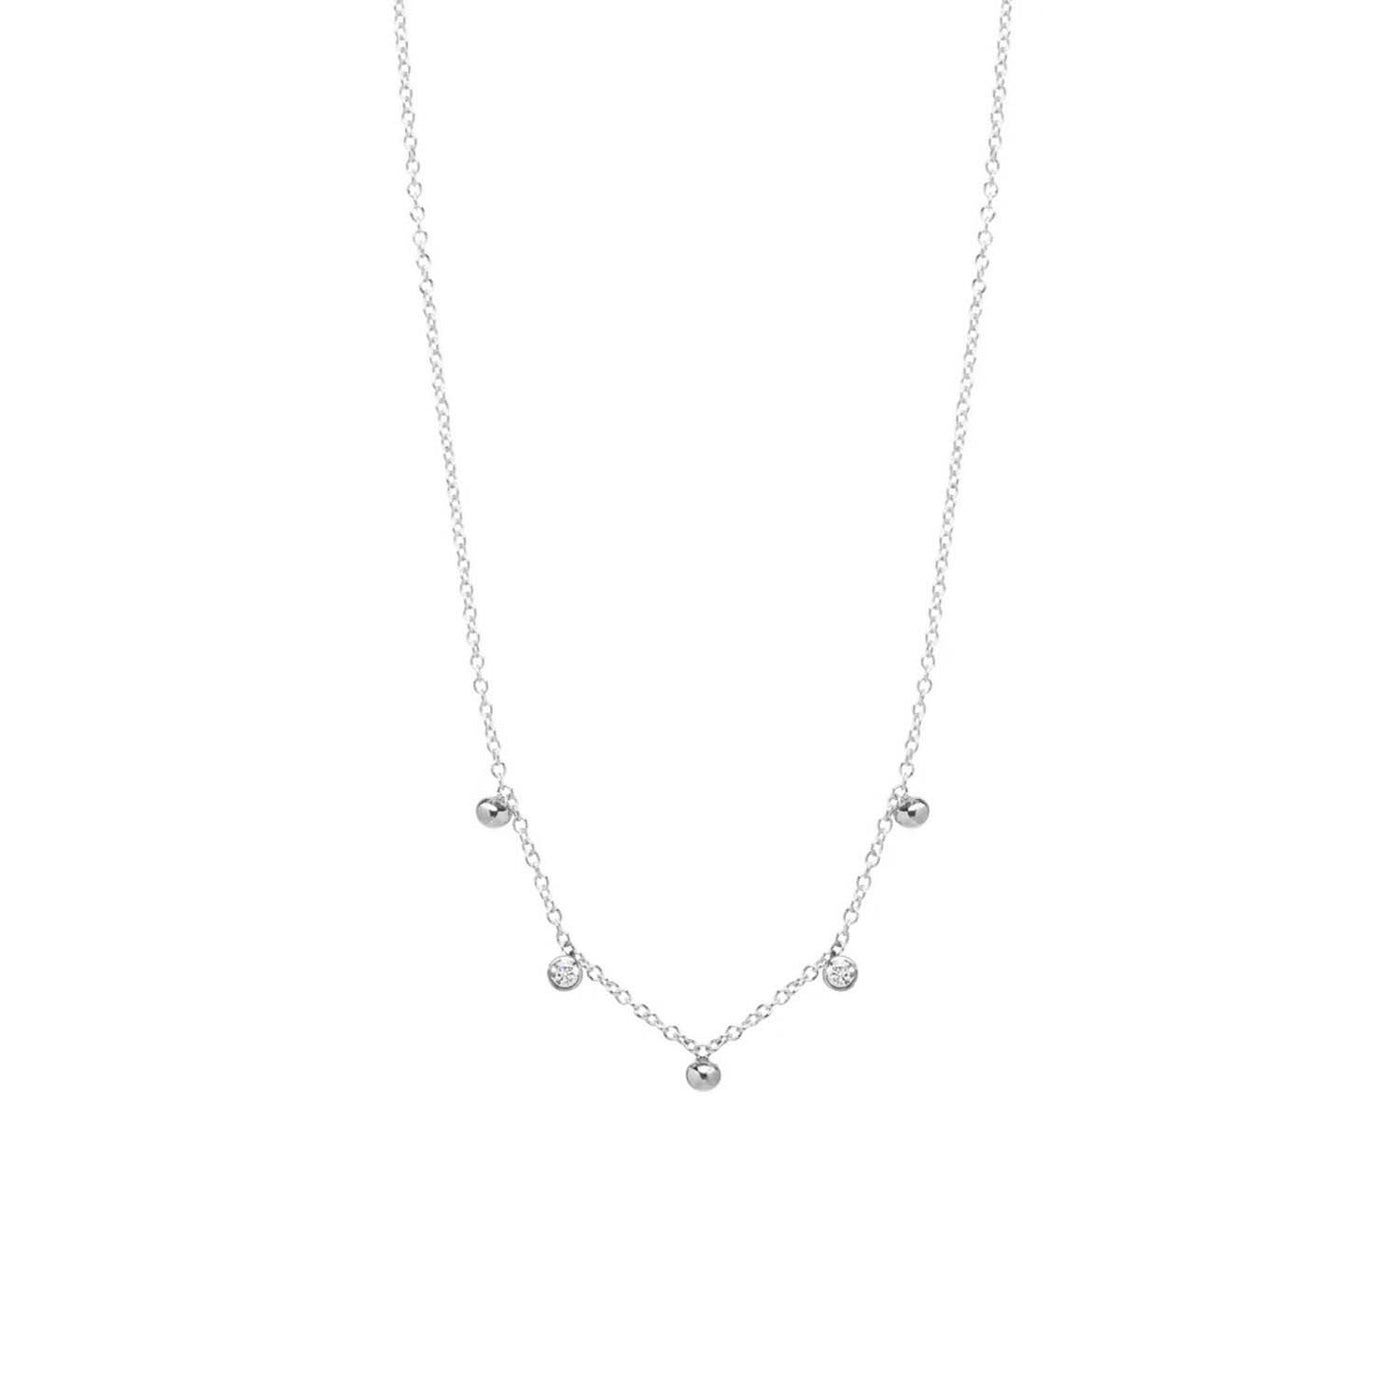 Scattered Diamond With Tiny Gold Bead Necklace